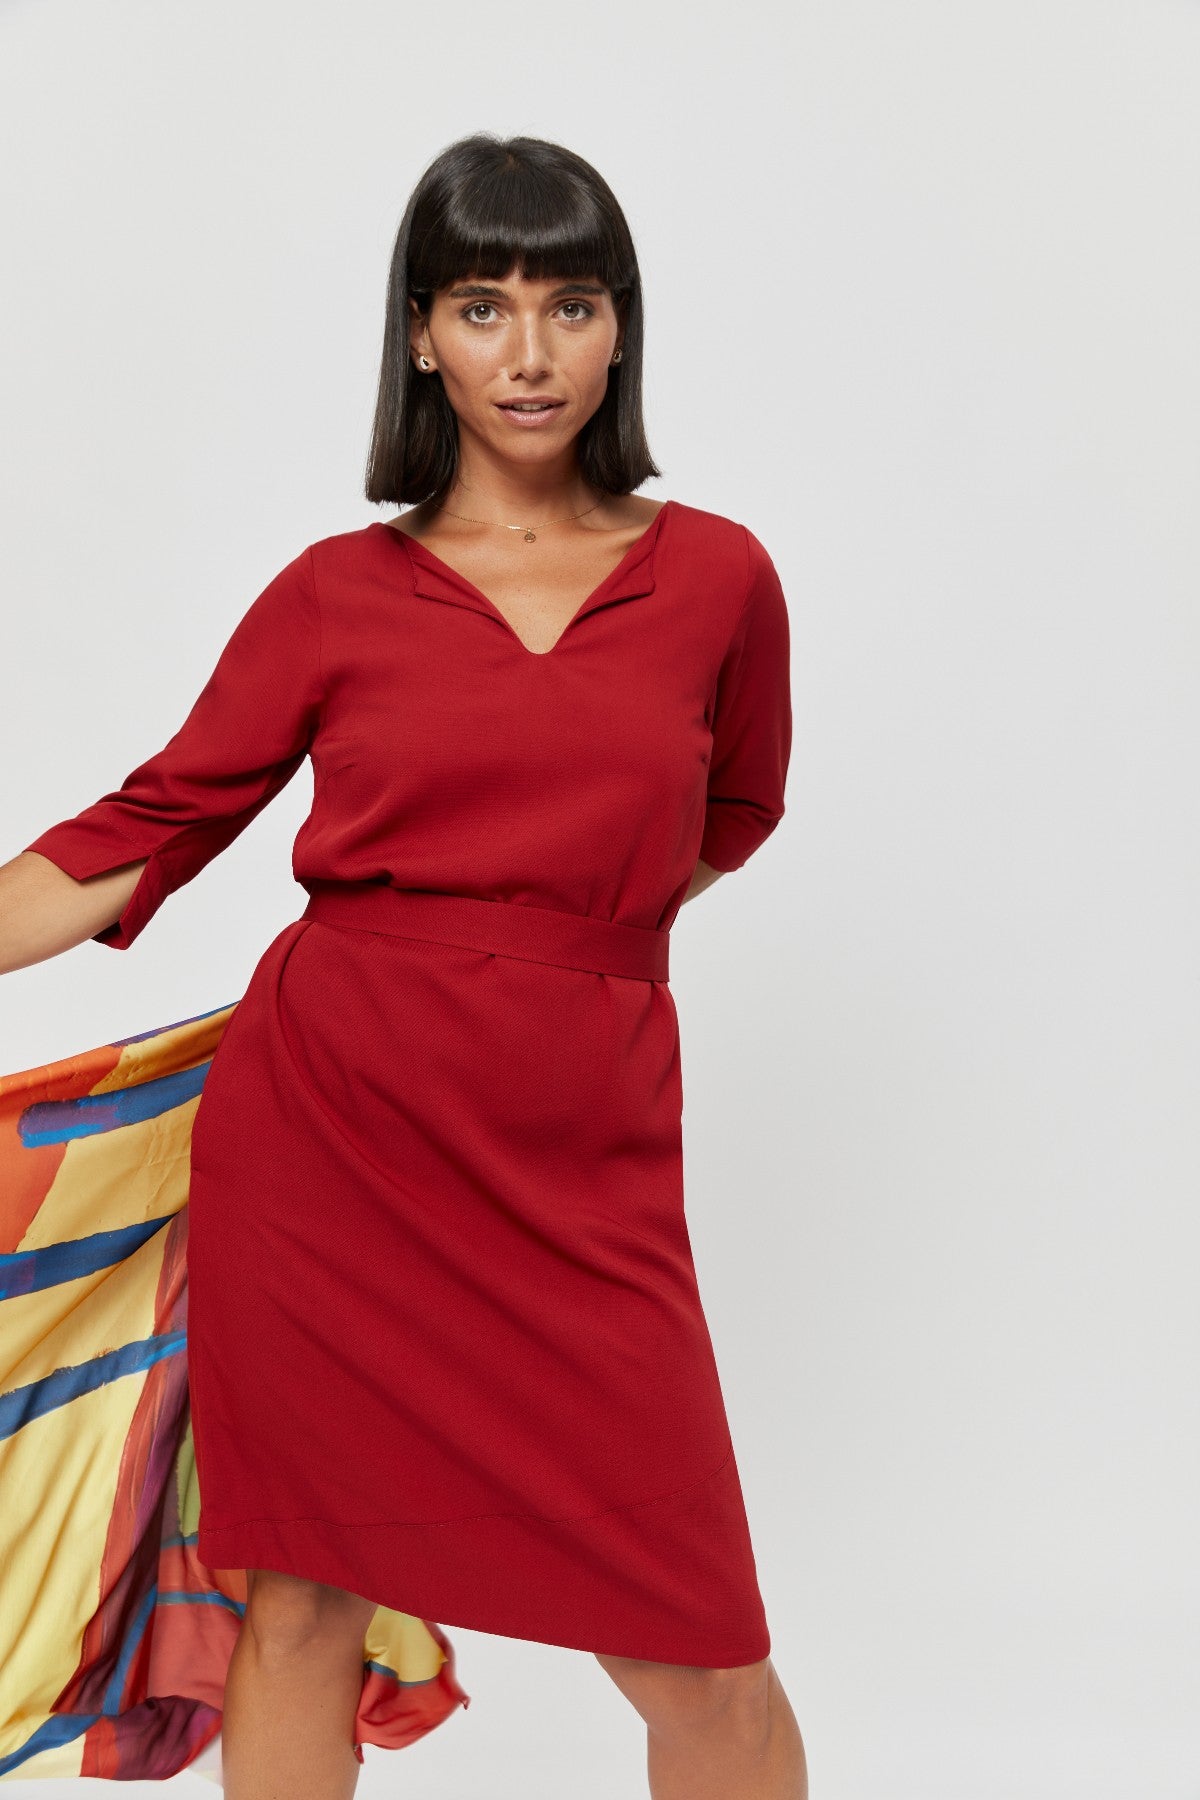 Catherine | Dress in Red with optional belt